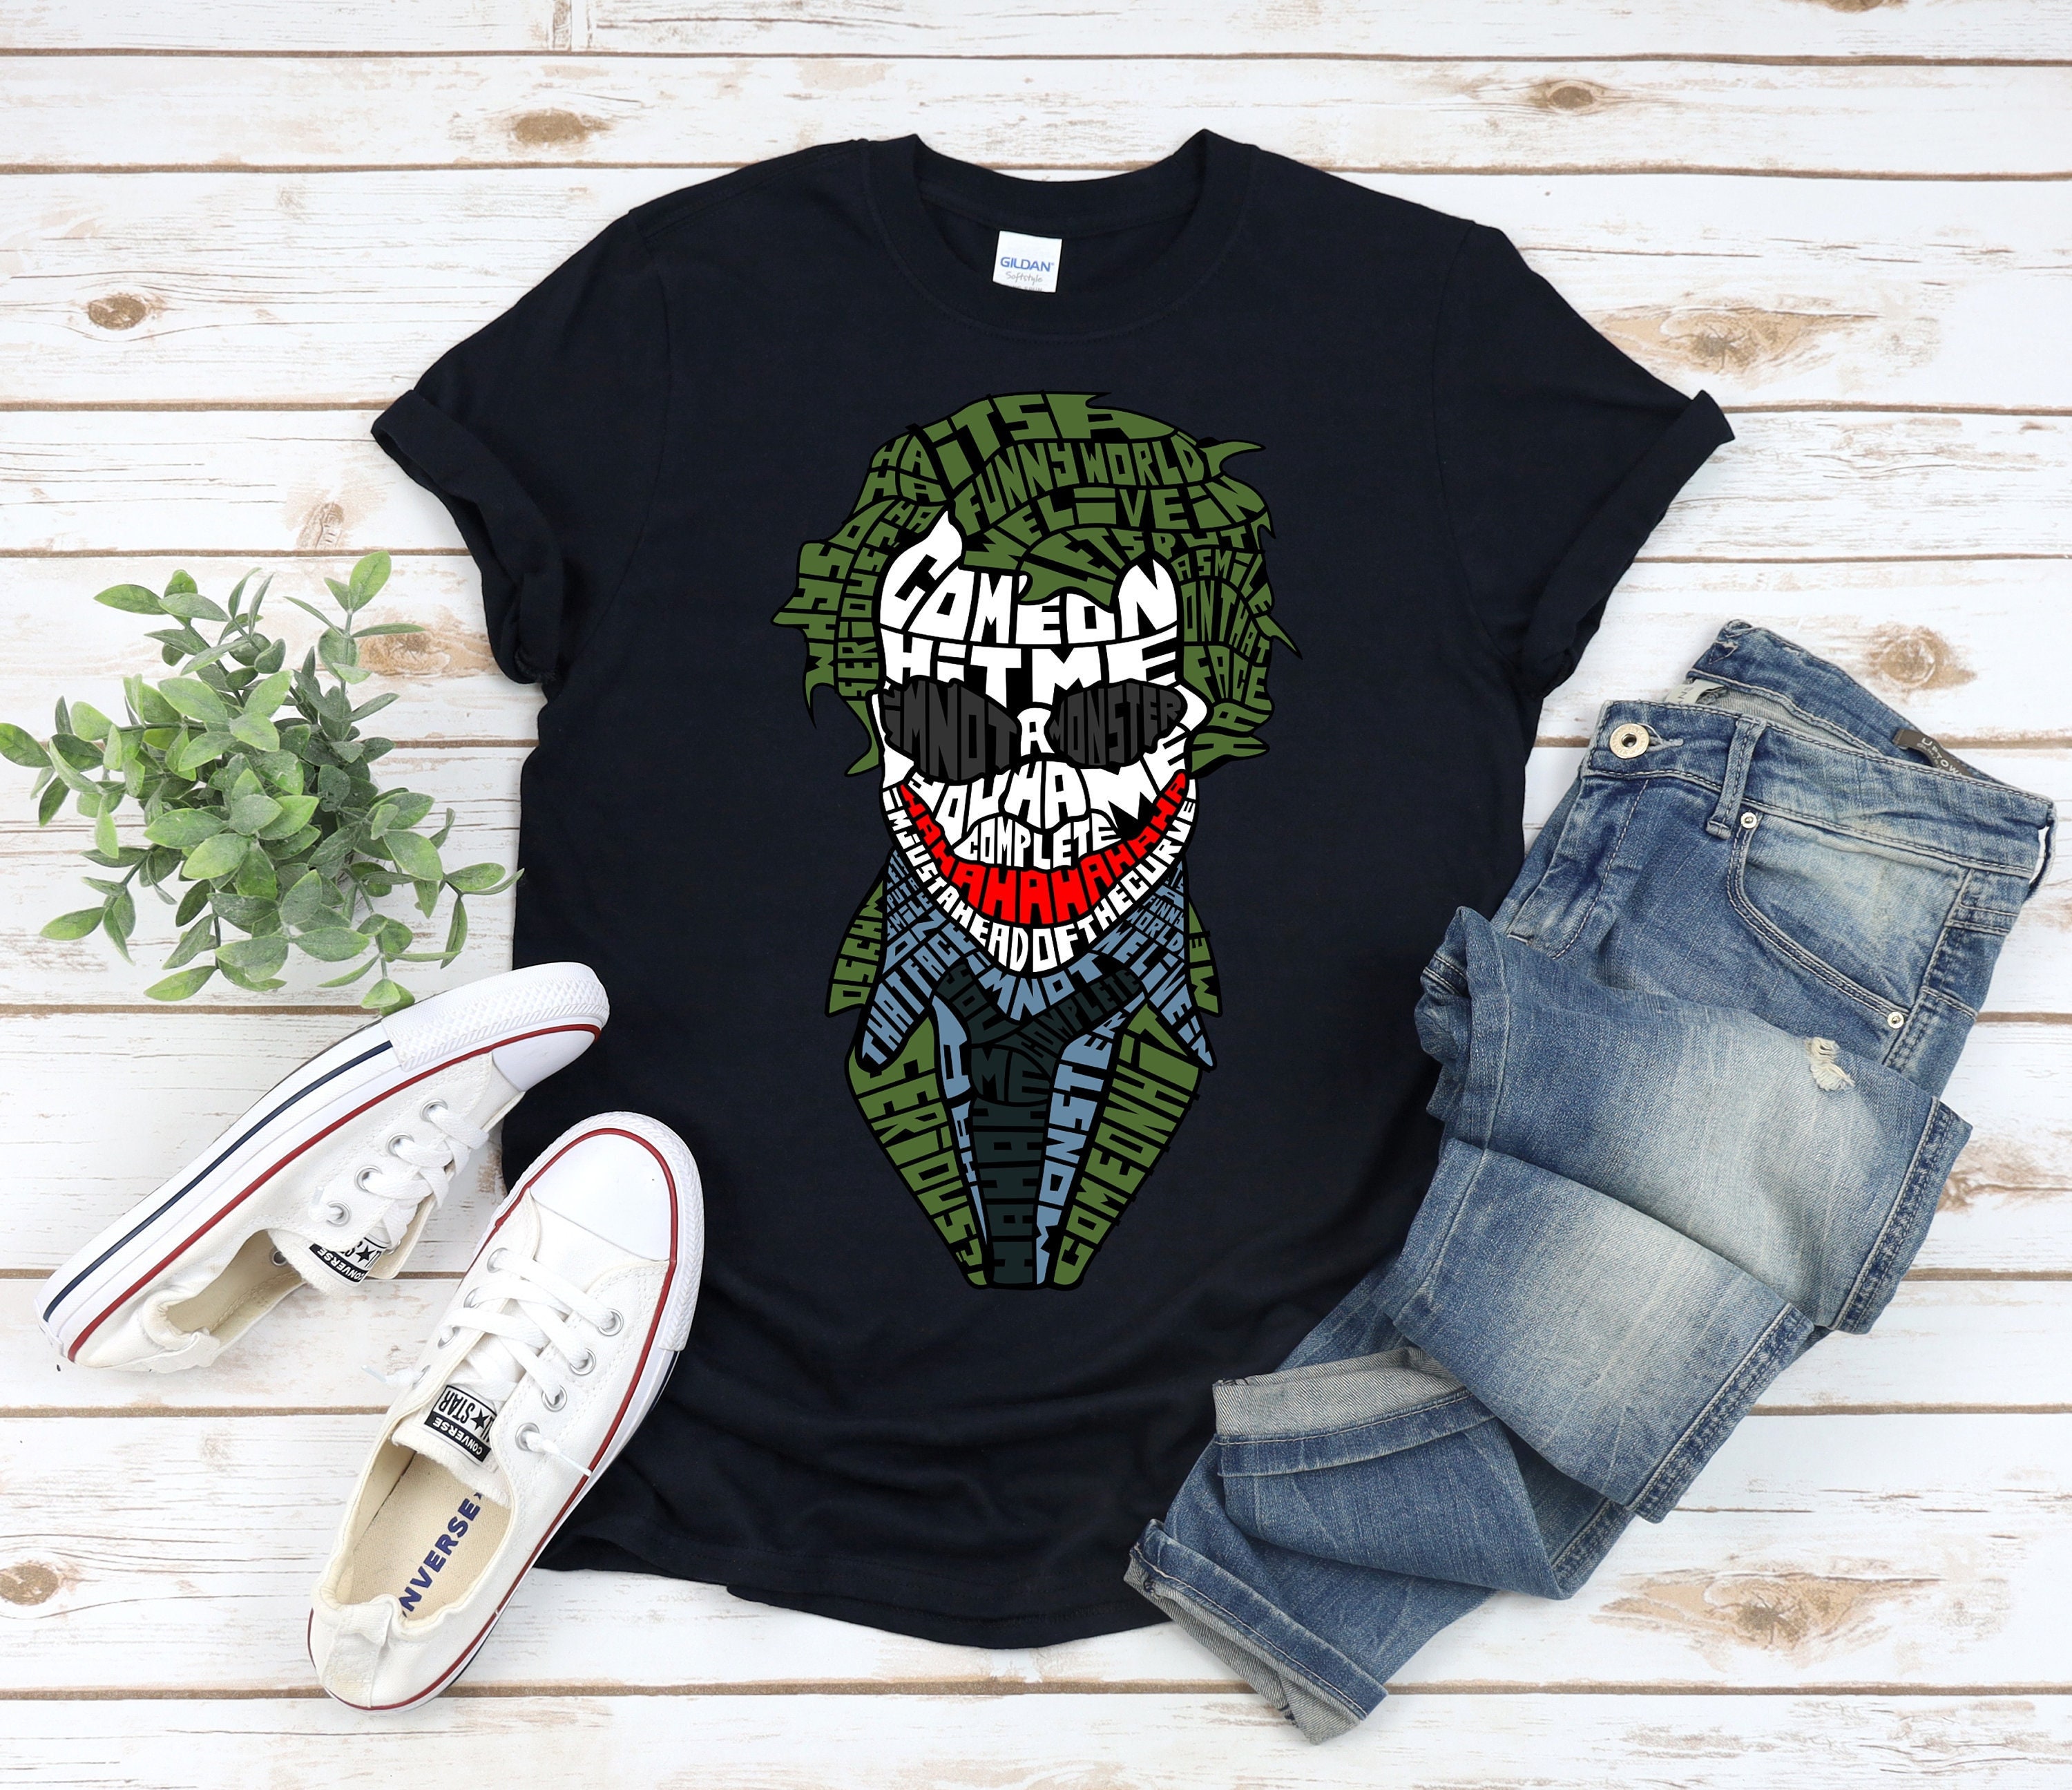 some bootlegs from aliexpress : r/juggalo